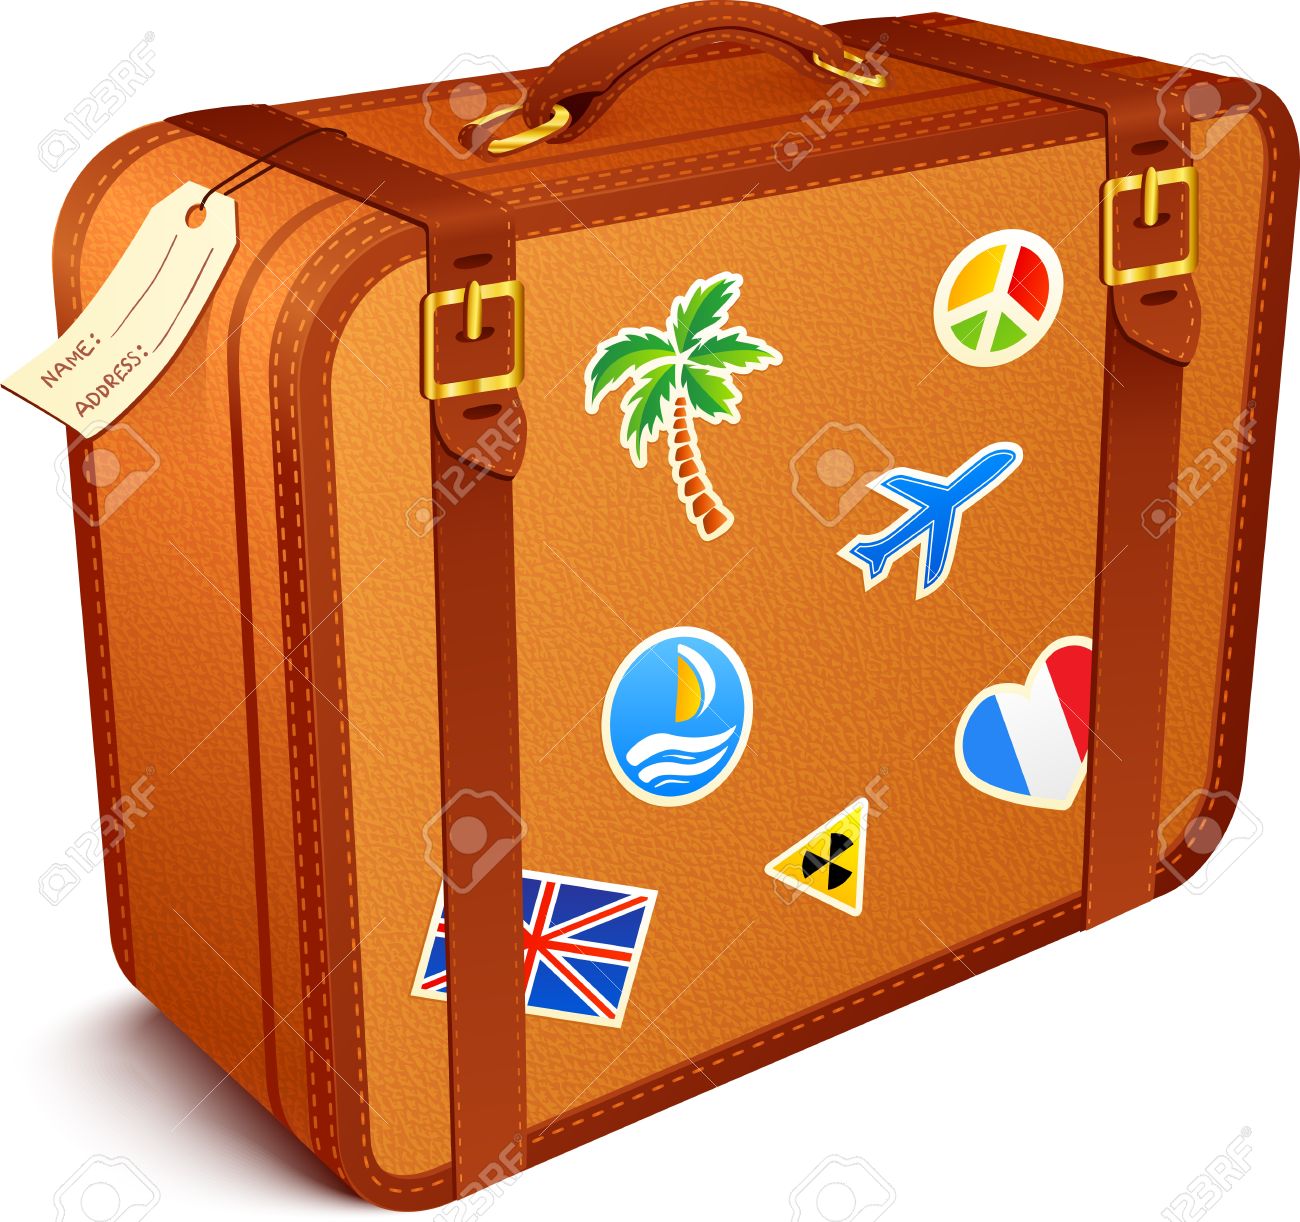 Luggage Clipart Free Travel S